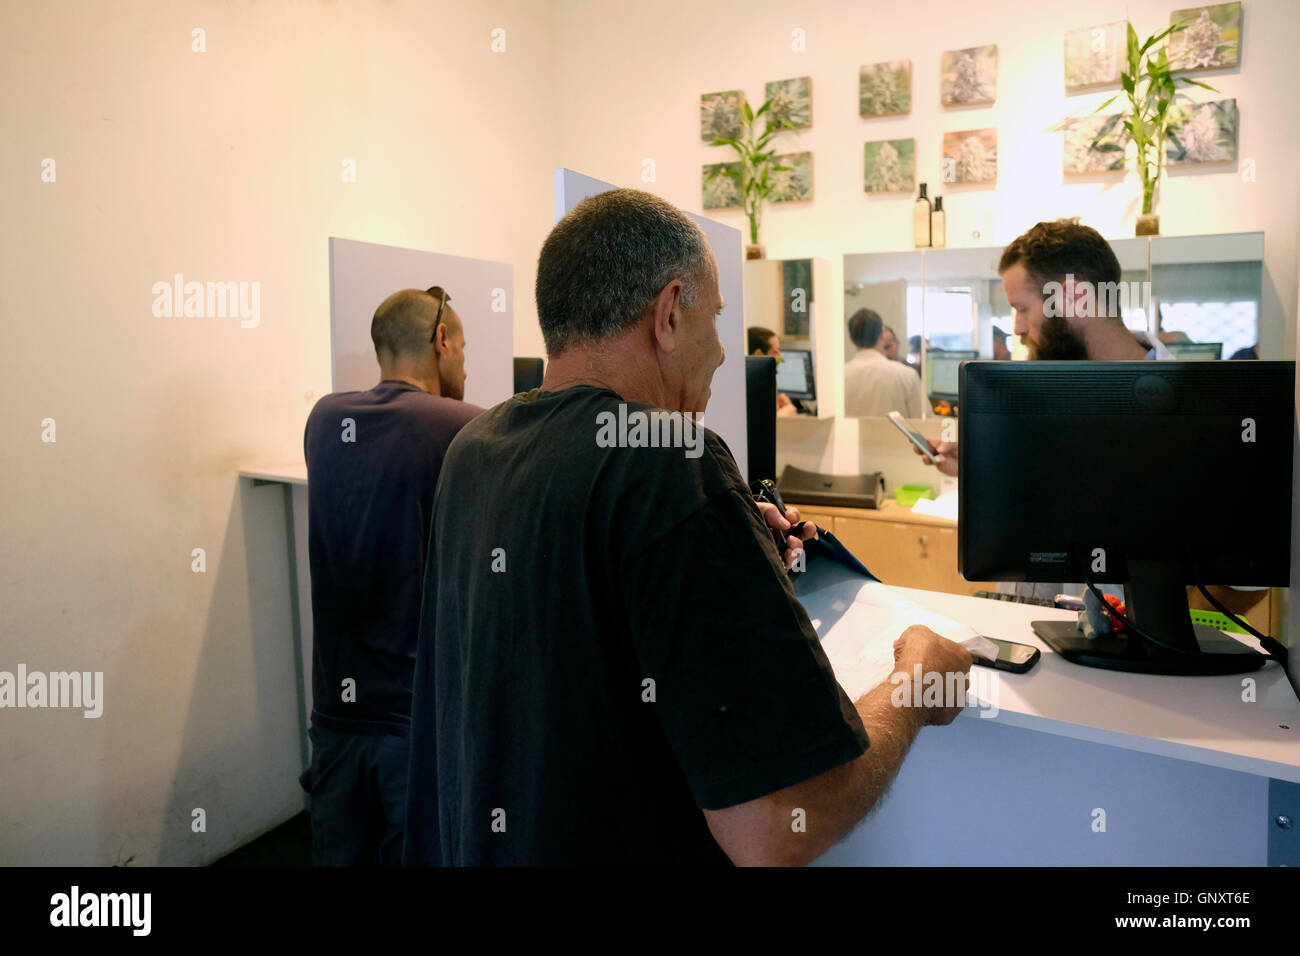 Israeli prescription-carrying patients  purchasing medical marijuana at a dispensary belonging to Tikun Olam, Israel's largest medical marijuana supplier in Tel Aviv on 01 September 2016. Israel is emerging as a world leader on the science of medical marijuana. In June, Israel approved a plan to ease restrictions on growing medical marijuana and announced that medical marijuana would eventually become a major growth and export industry. Stock Photo